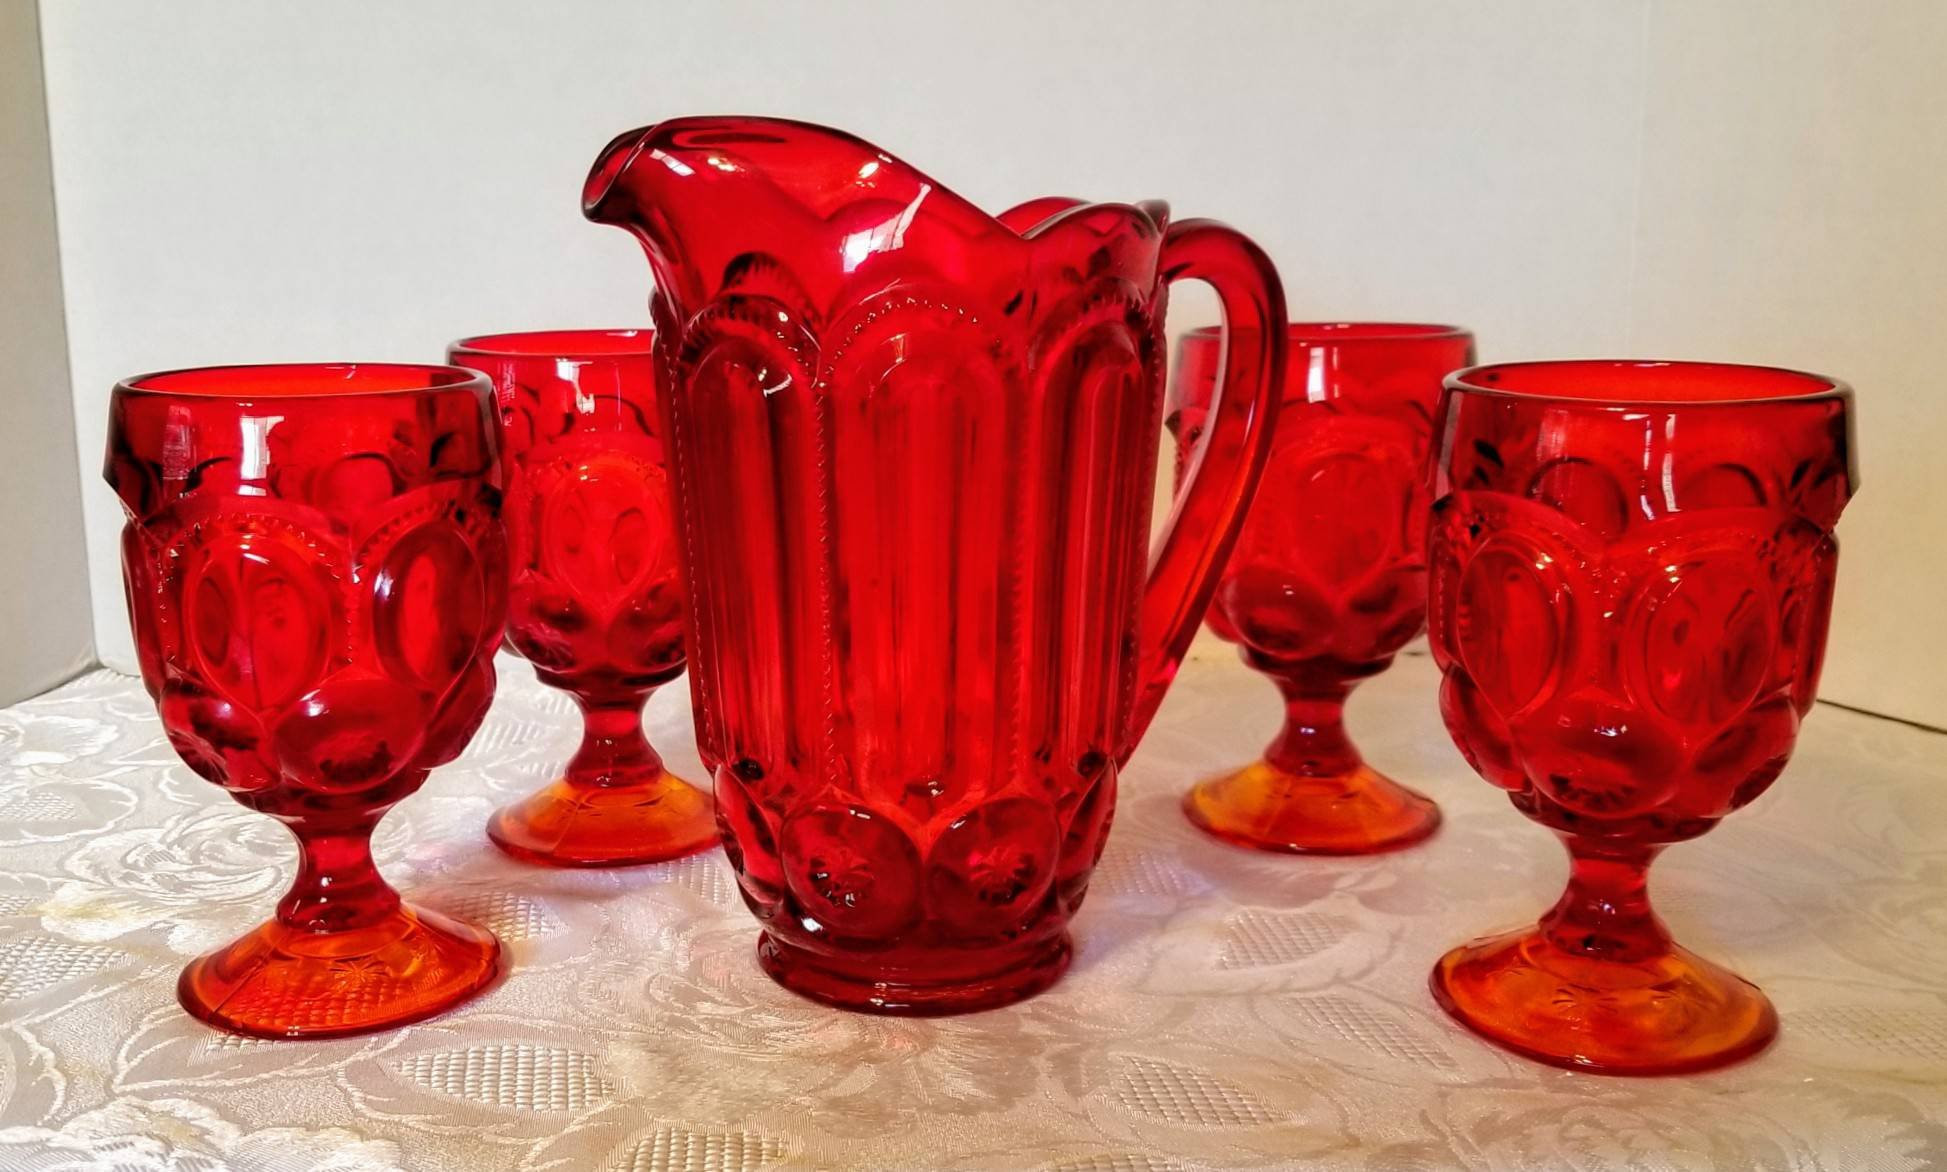 18 Ideal 6 Inch Crystal Vase 2024 free download 6 inch crystal vase of l e smith ruby red amberina moon and stars 32oz pitcher and etsy within dc29fc294c28ezoom